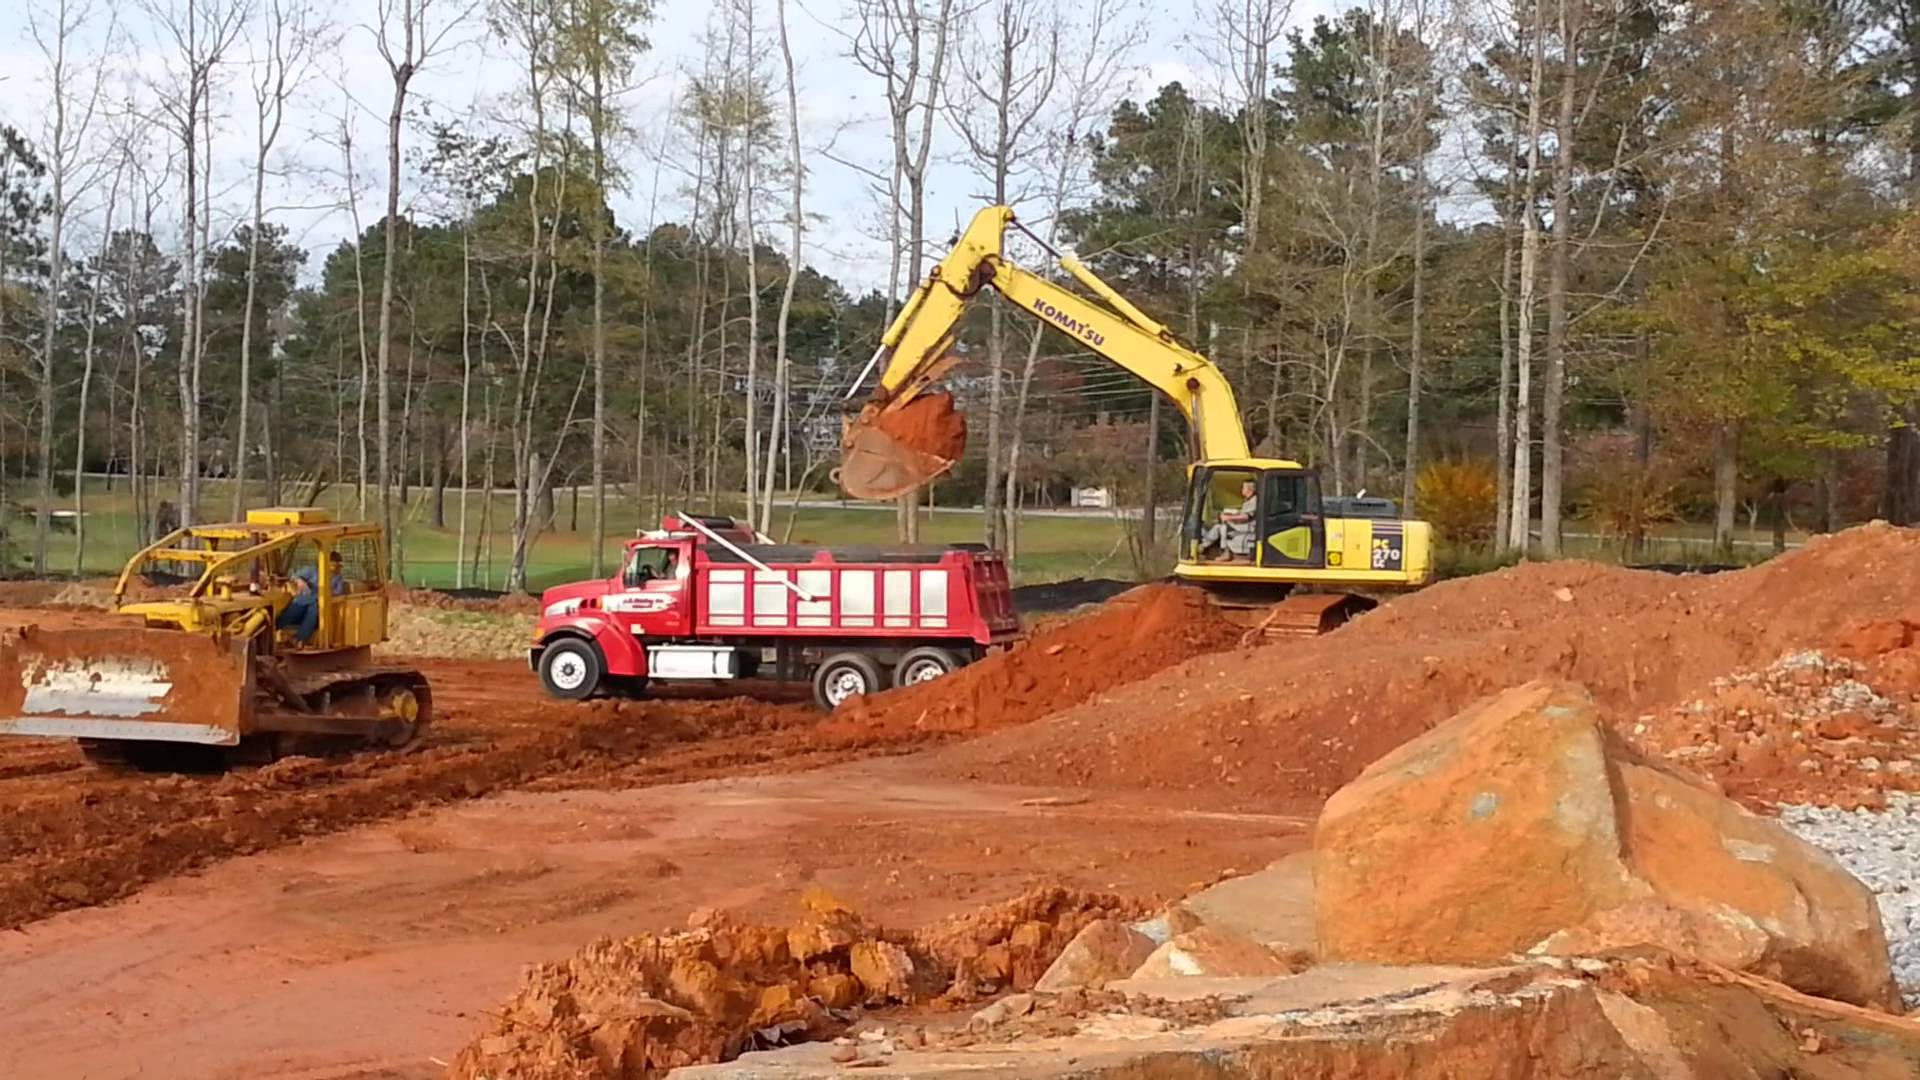 Small construction site footage - YouTube